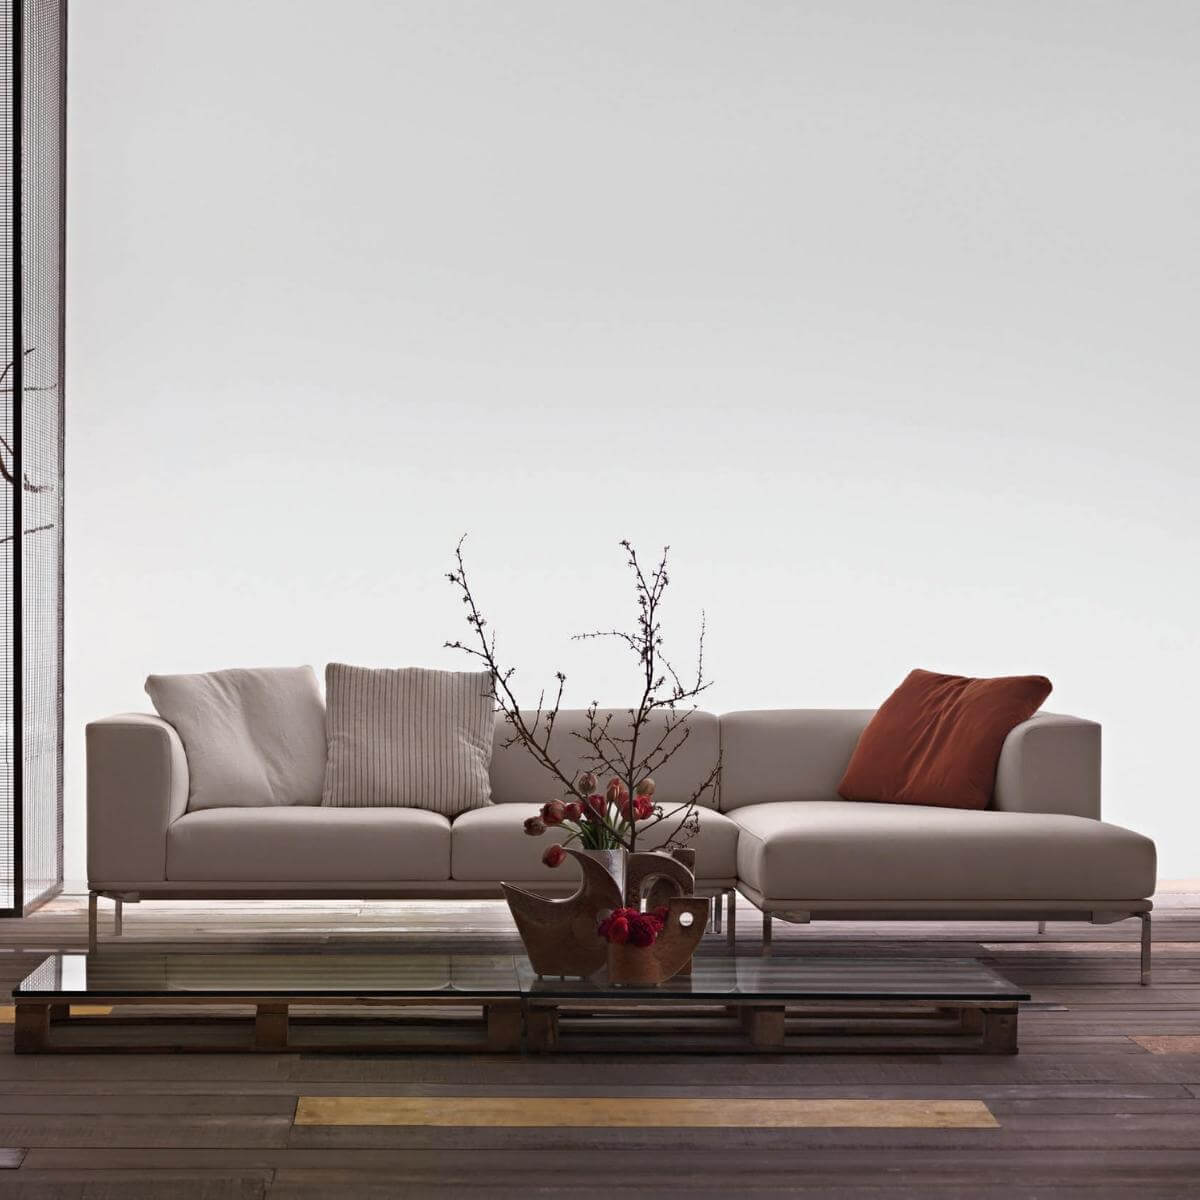 Evoke Enigma Cotton Linen Sofa: A Beige Oasis of Comfort and Style